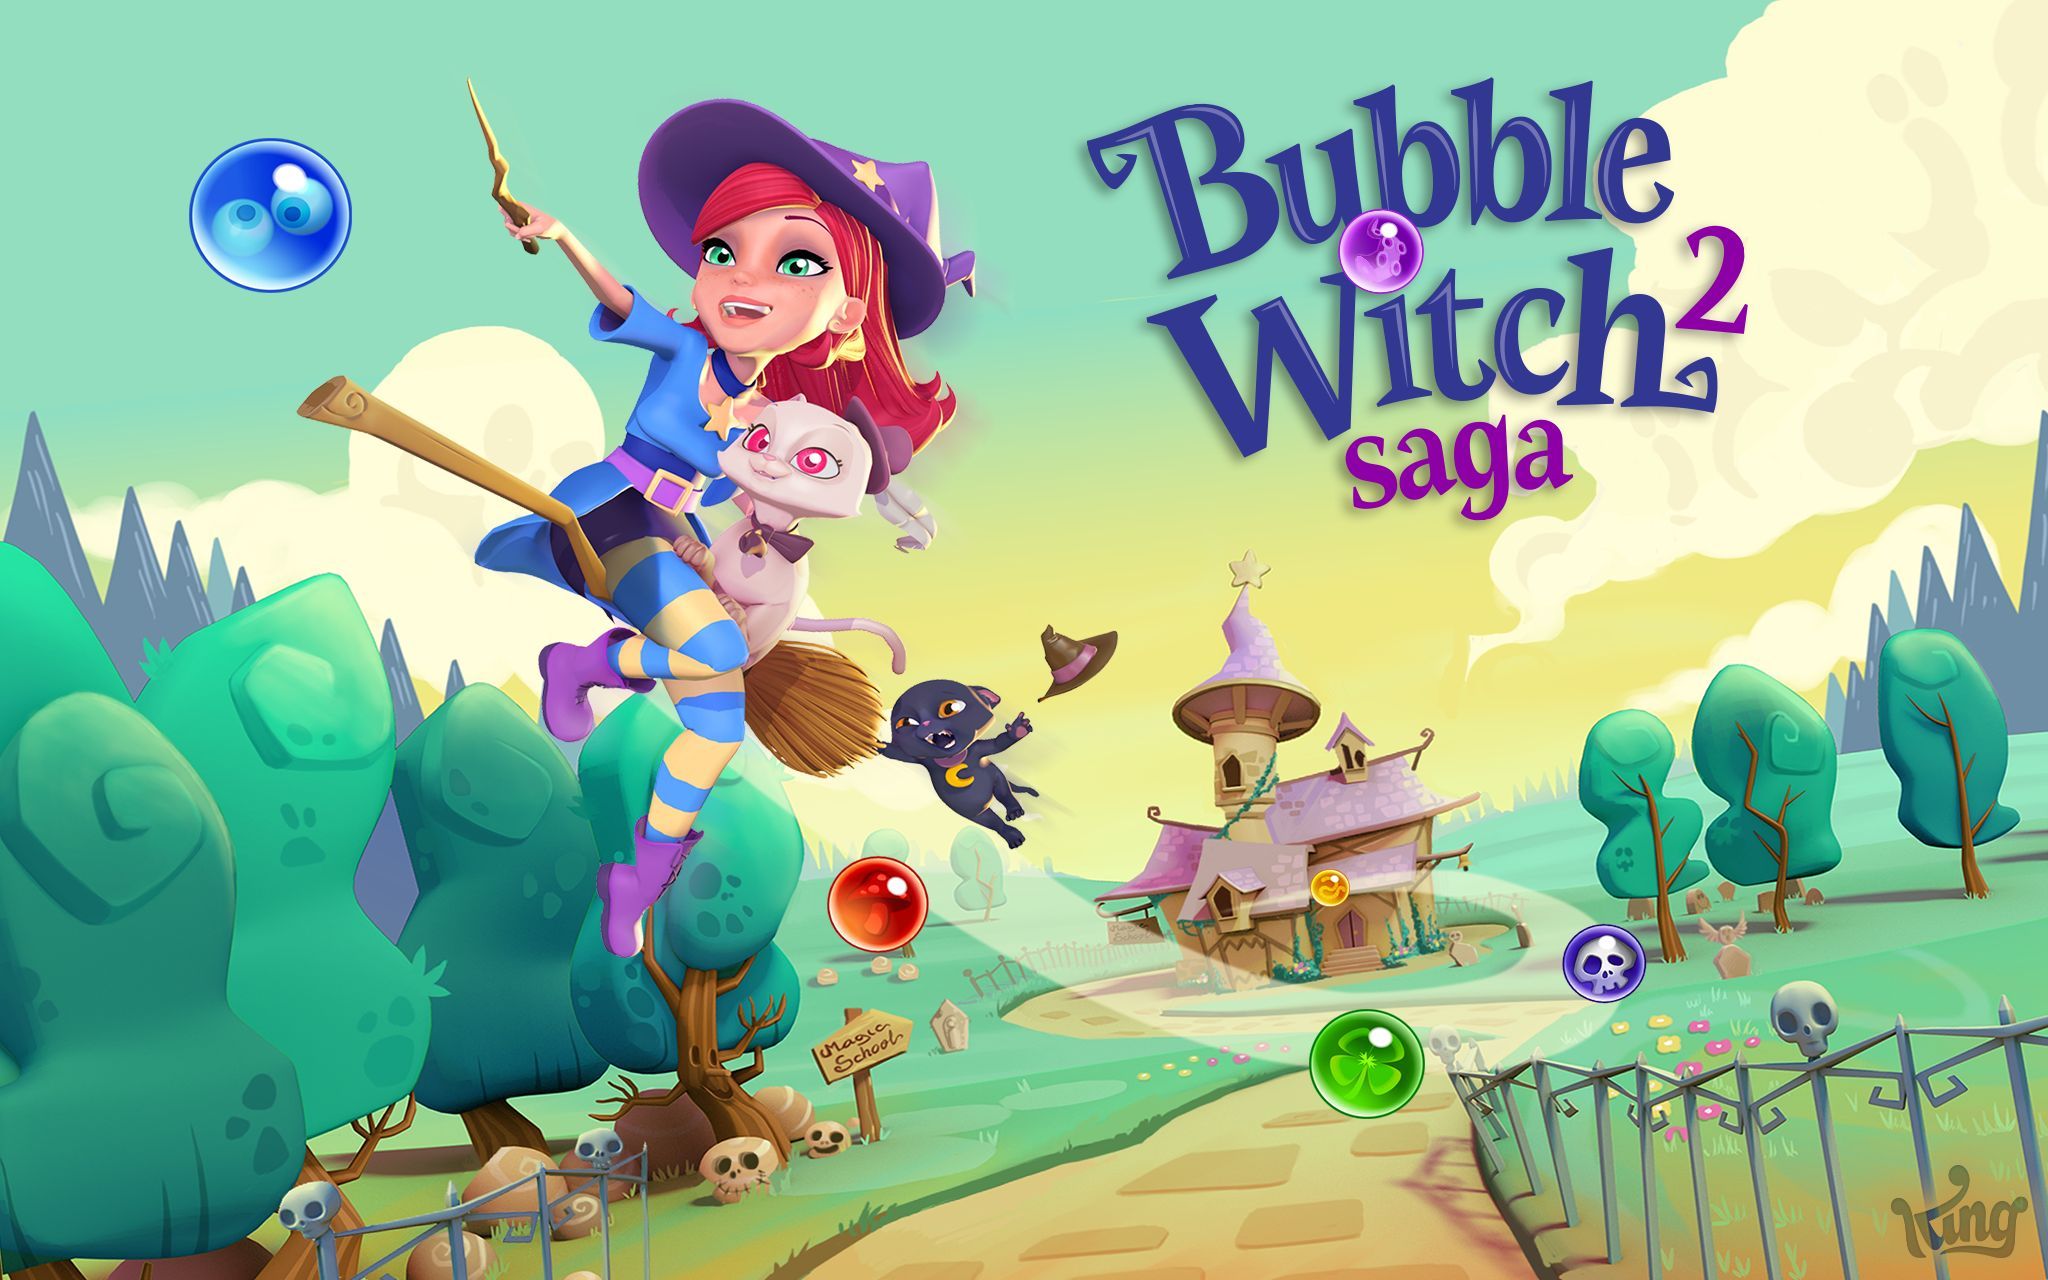 download bubble witch 3 saga cheats